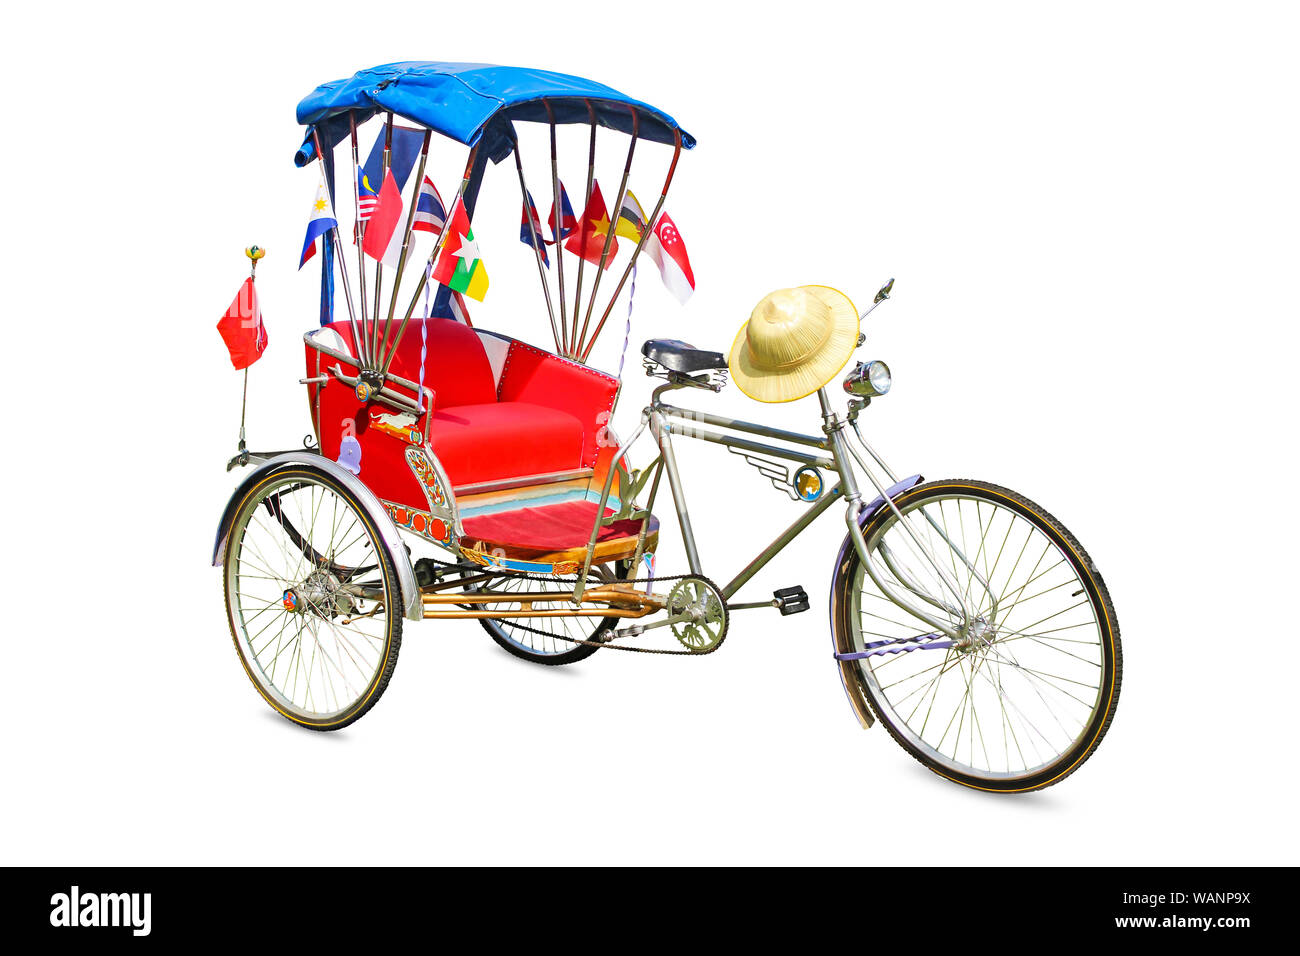 Thailand tricycle, Vintage old style decorated with flag of Thailand and Asean on isolated white background. Stock Photo